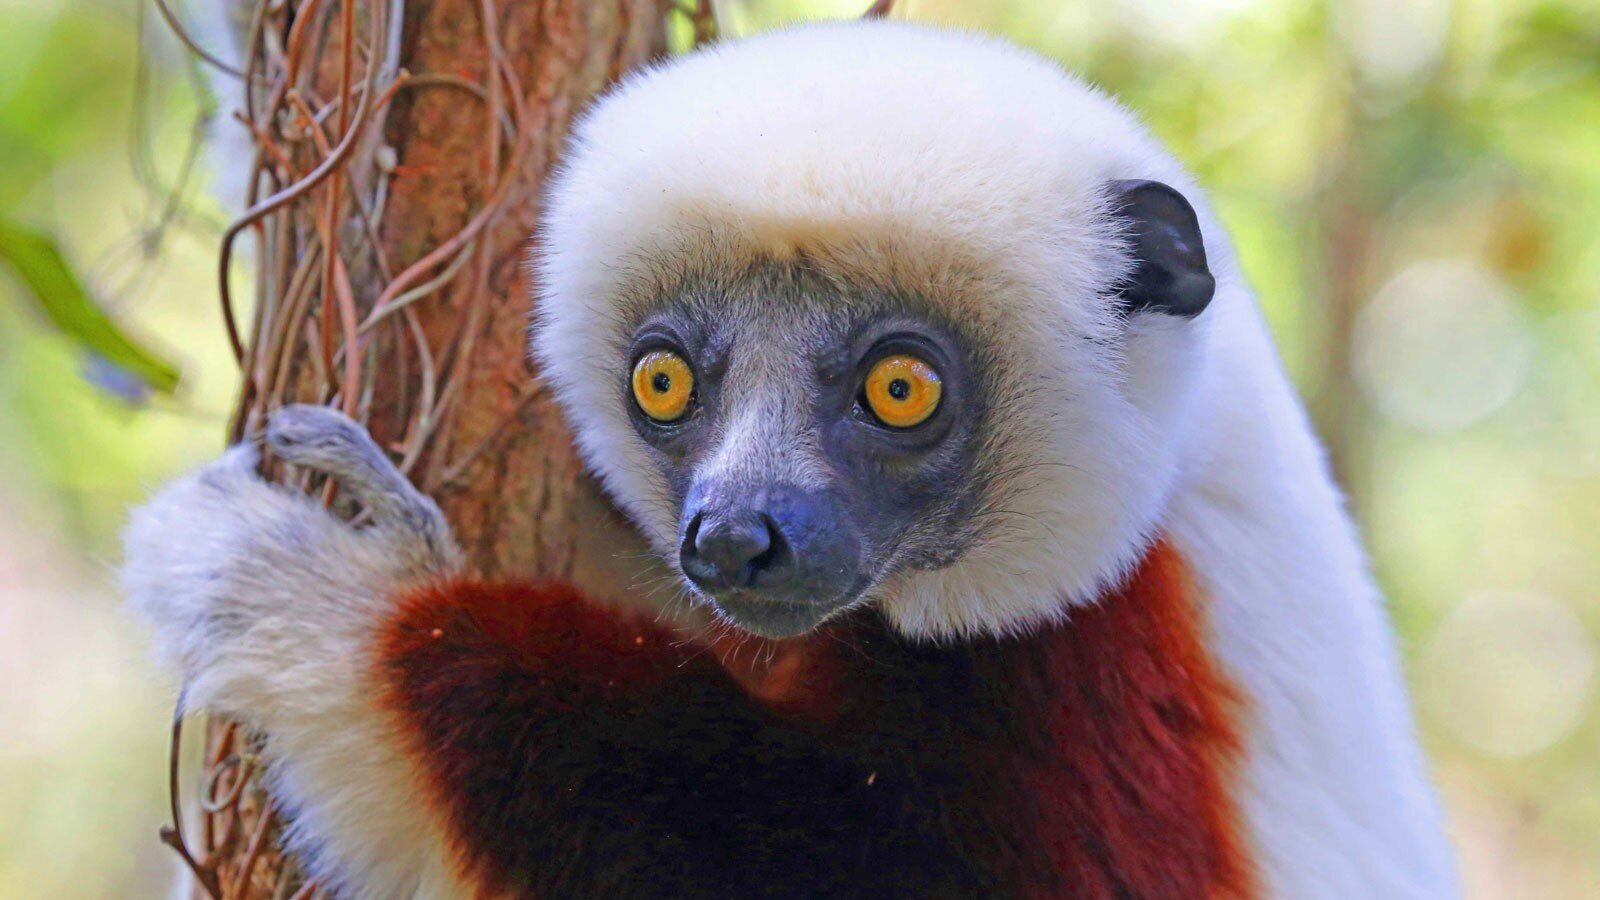 Fancy meeting some lemurs with us in Madagascar?